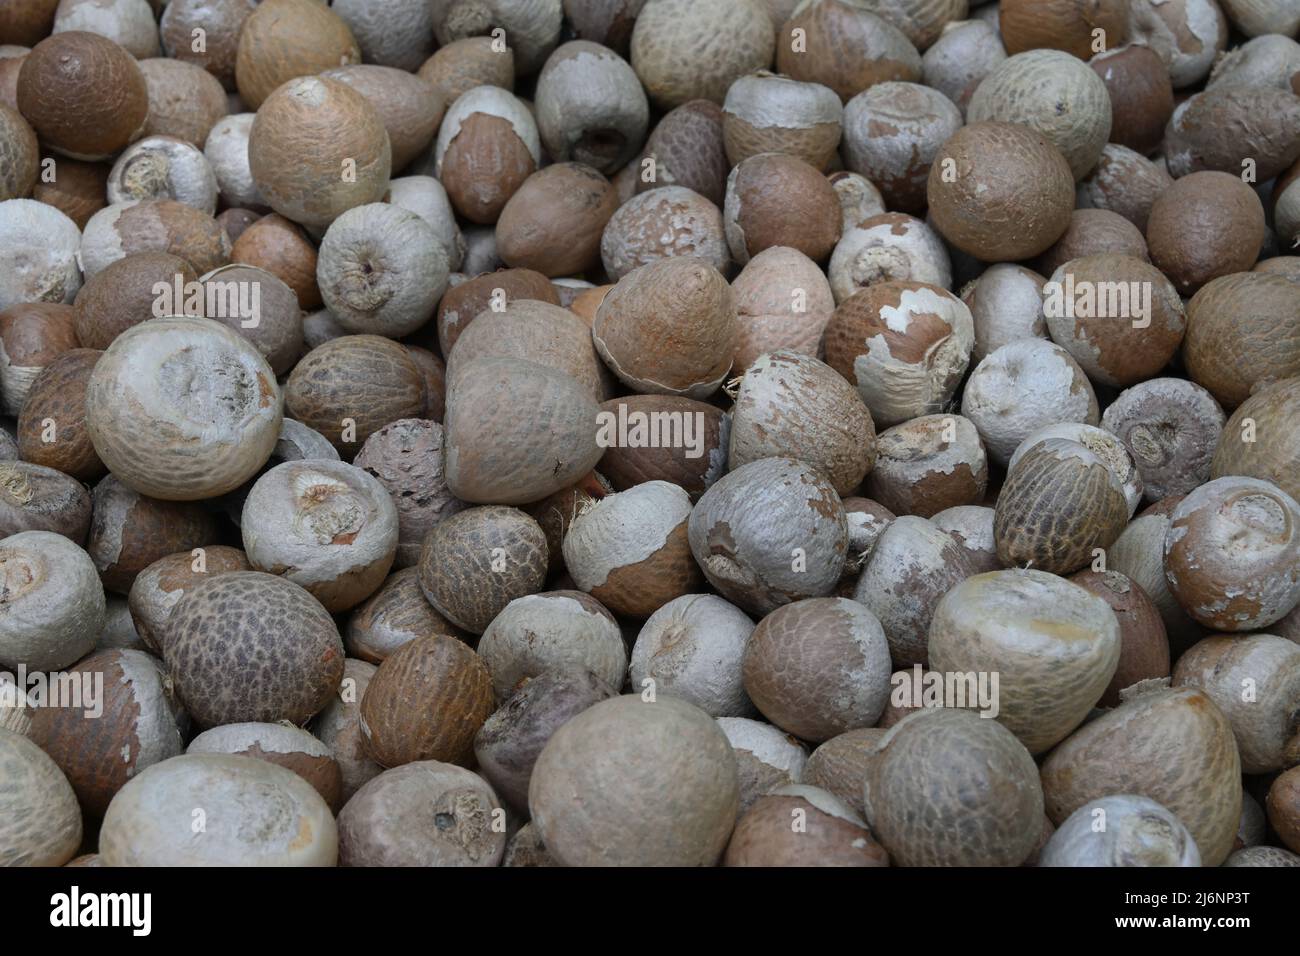 Side view of peeled Areca nuts or betel nuts (Areca catechu) Stock Photo